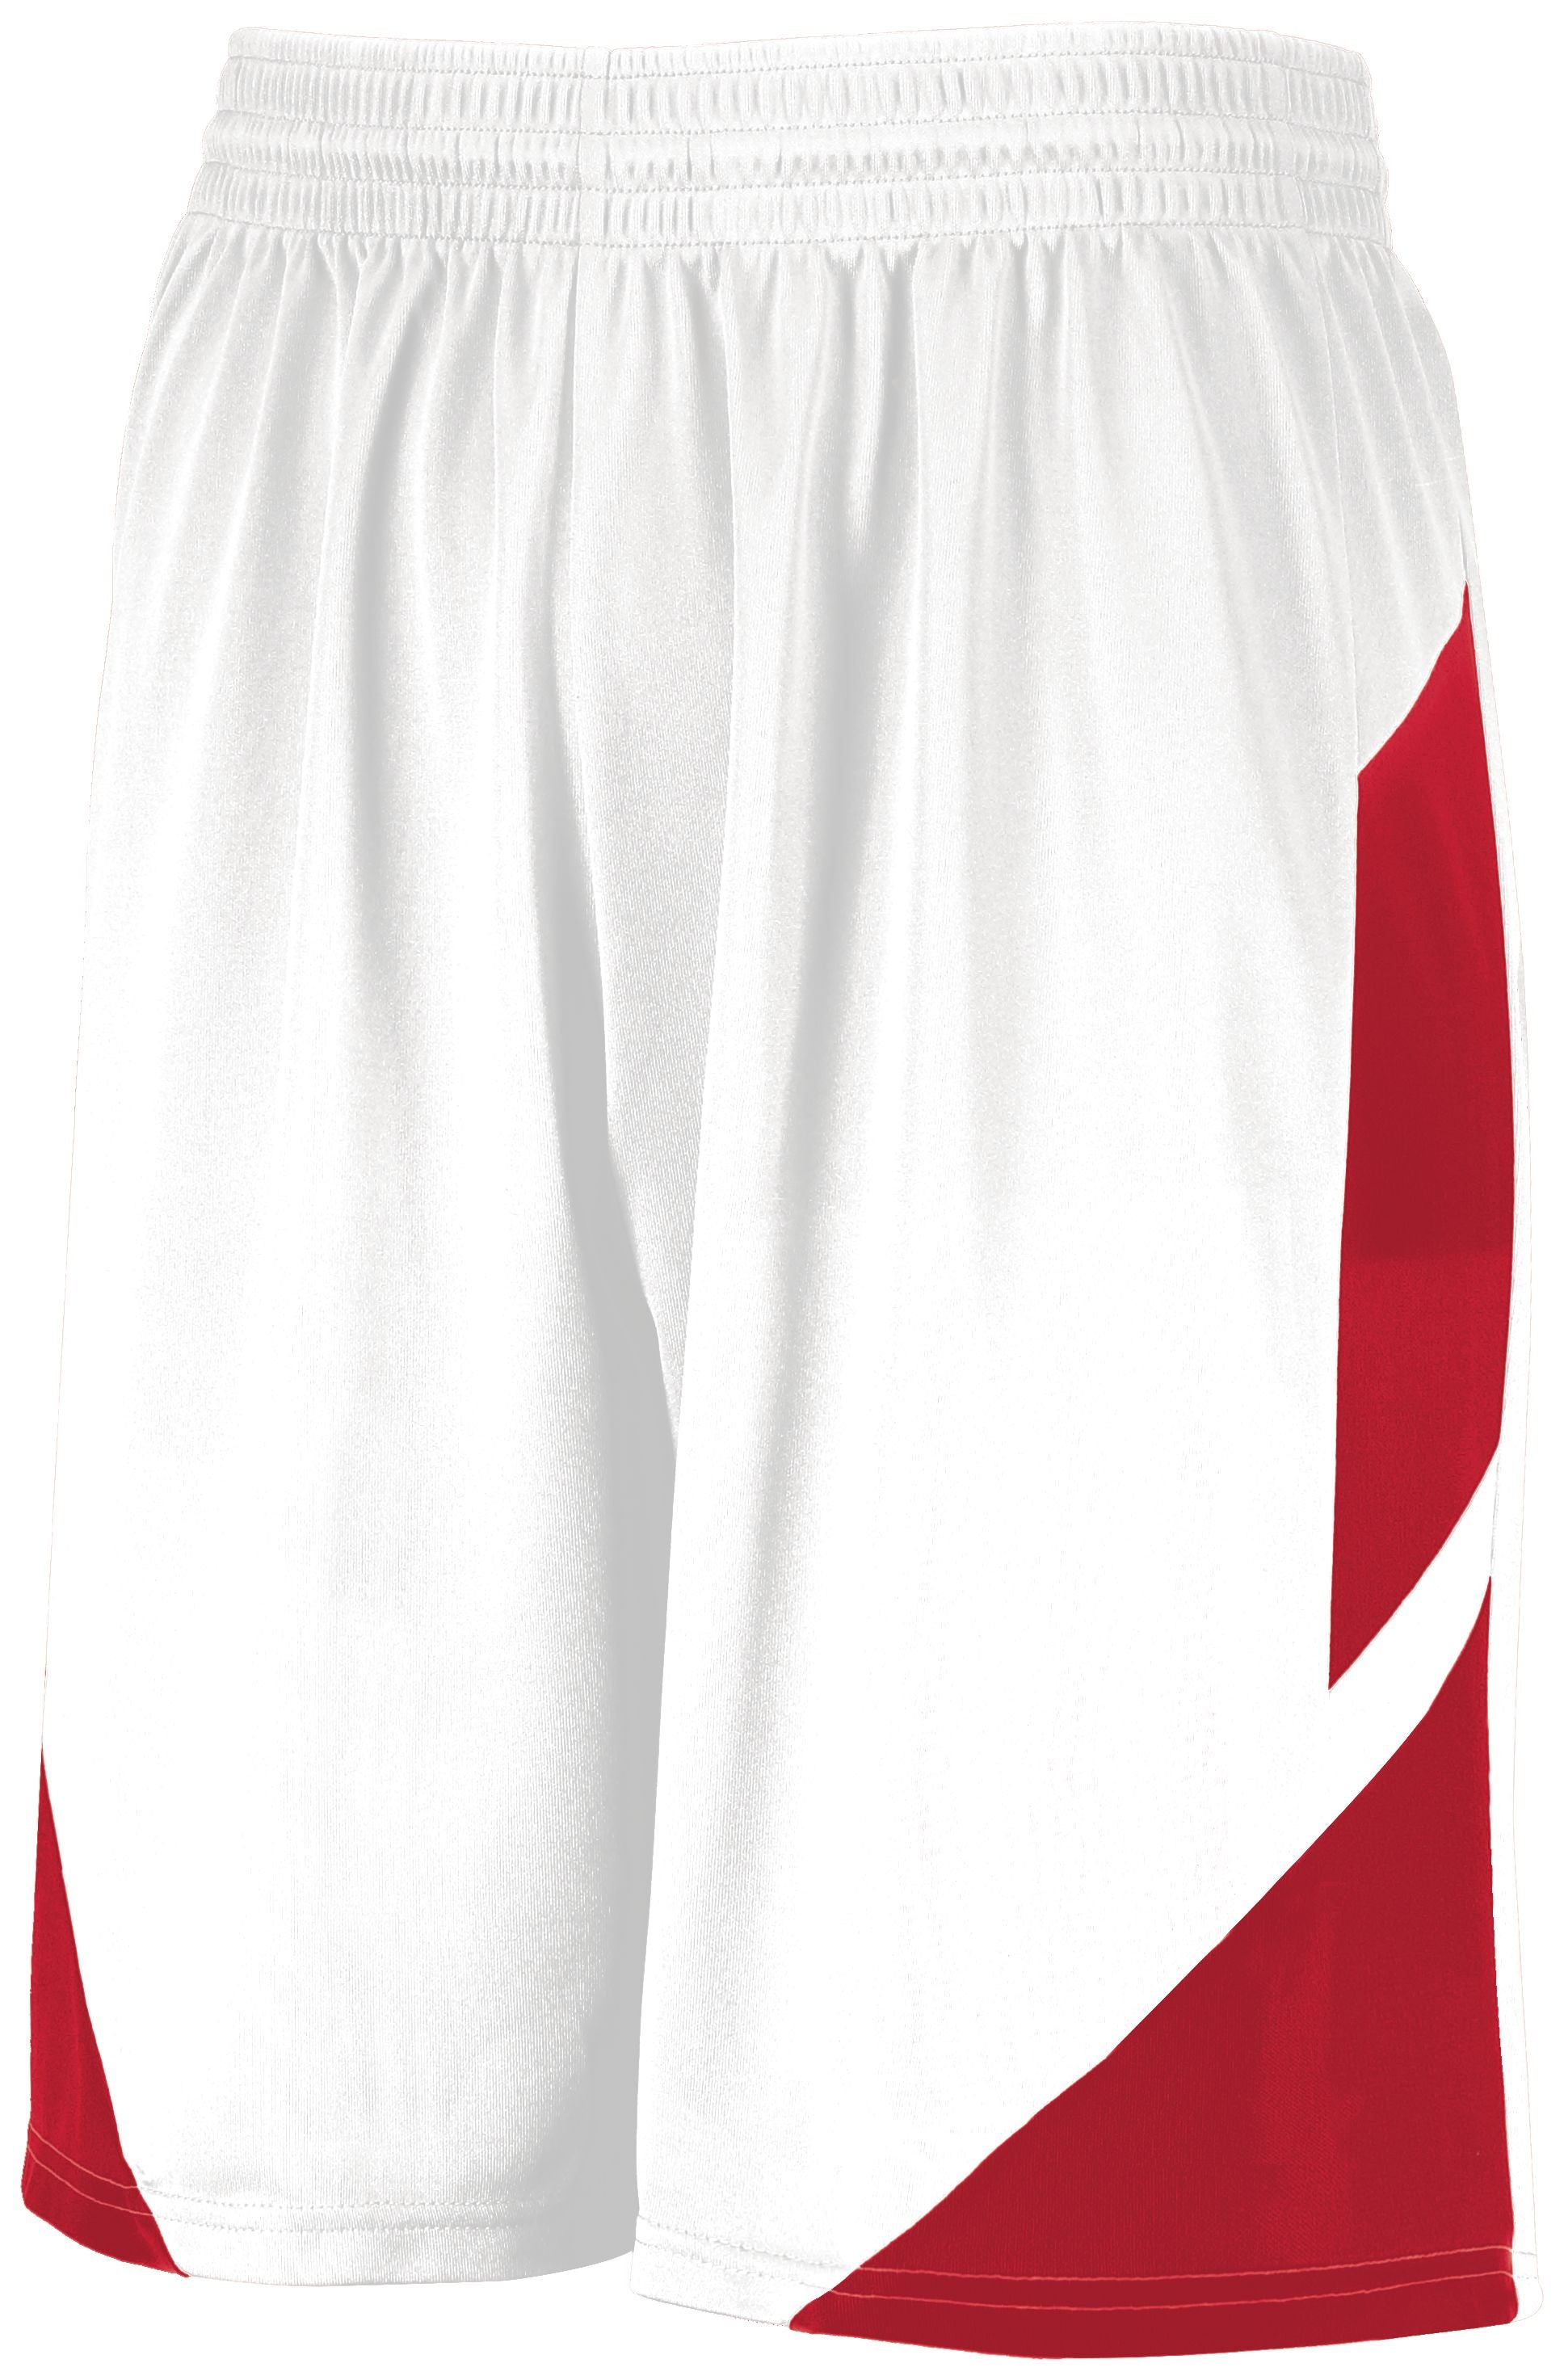 Augusta Sportswear Step-Back Basketball Shorts in White/Red  -Part of the Adult, Adult-Shorts, Augusta-Products, Basketball, All-Sports, All-Sports-1 product lines at KanaleyCreations.com